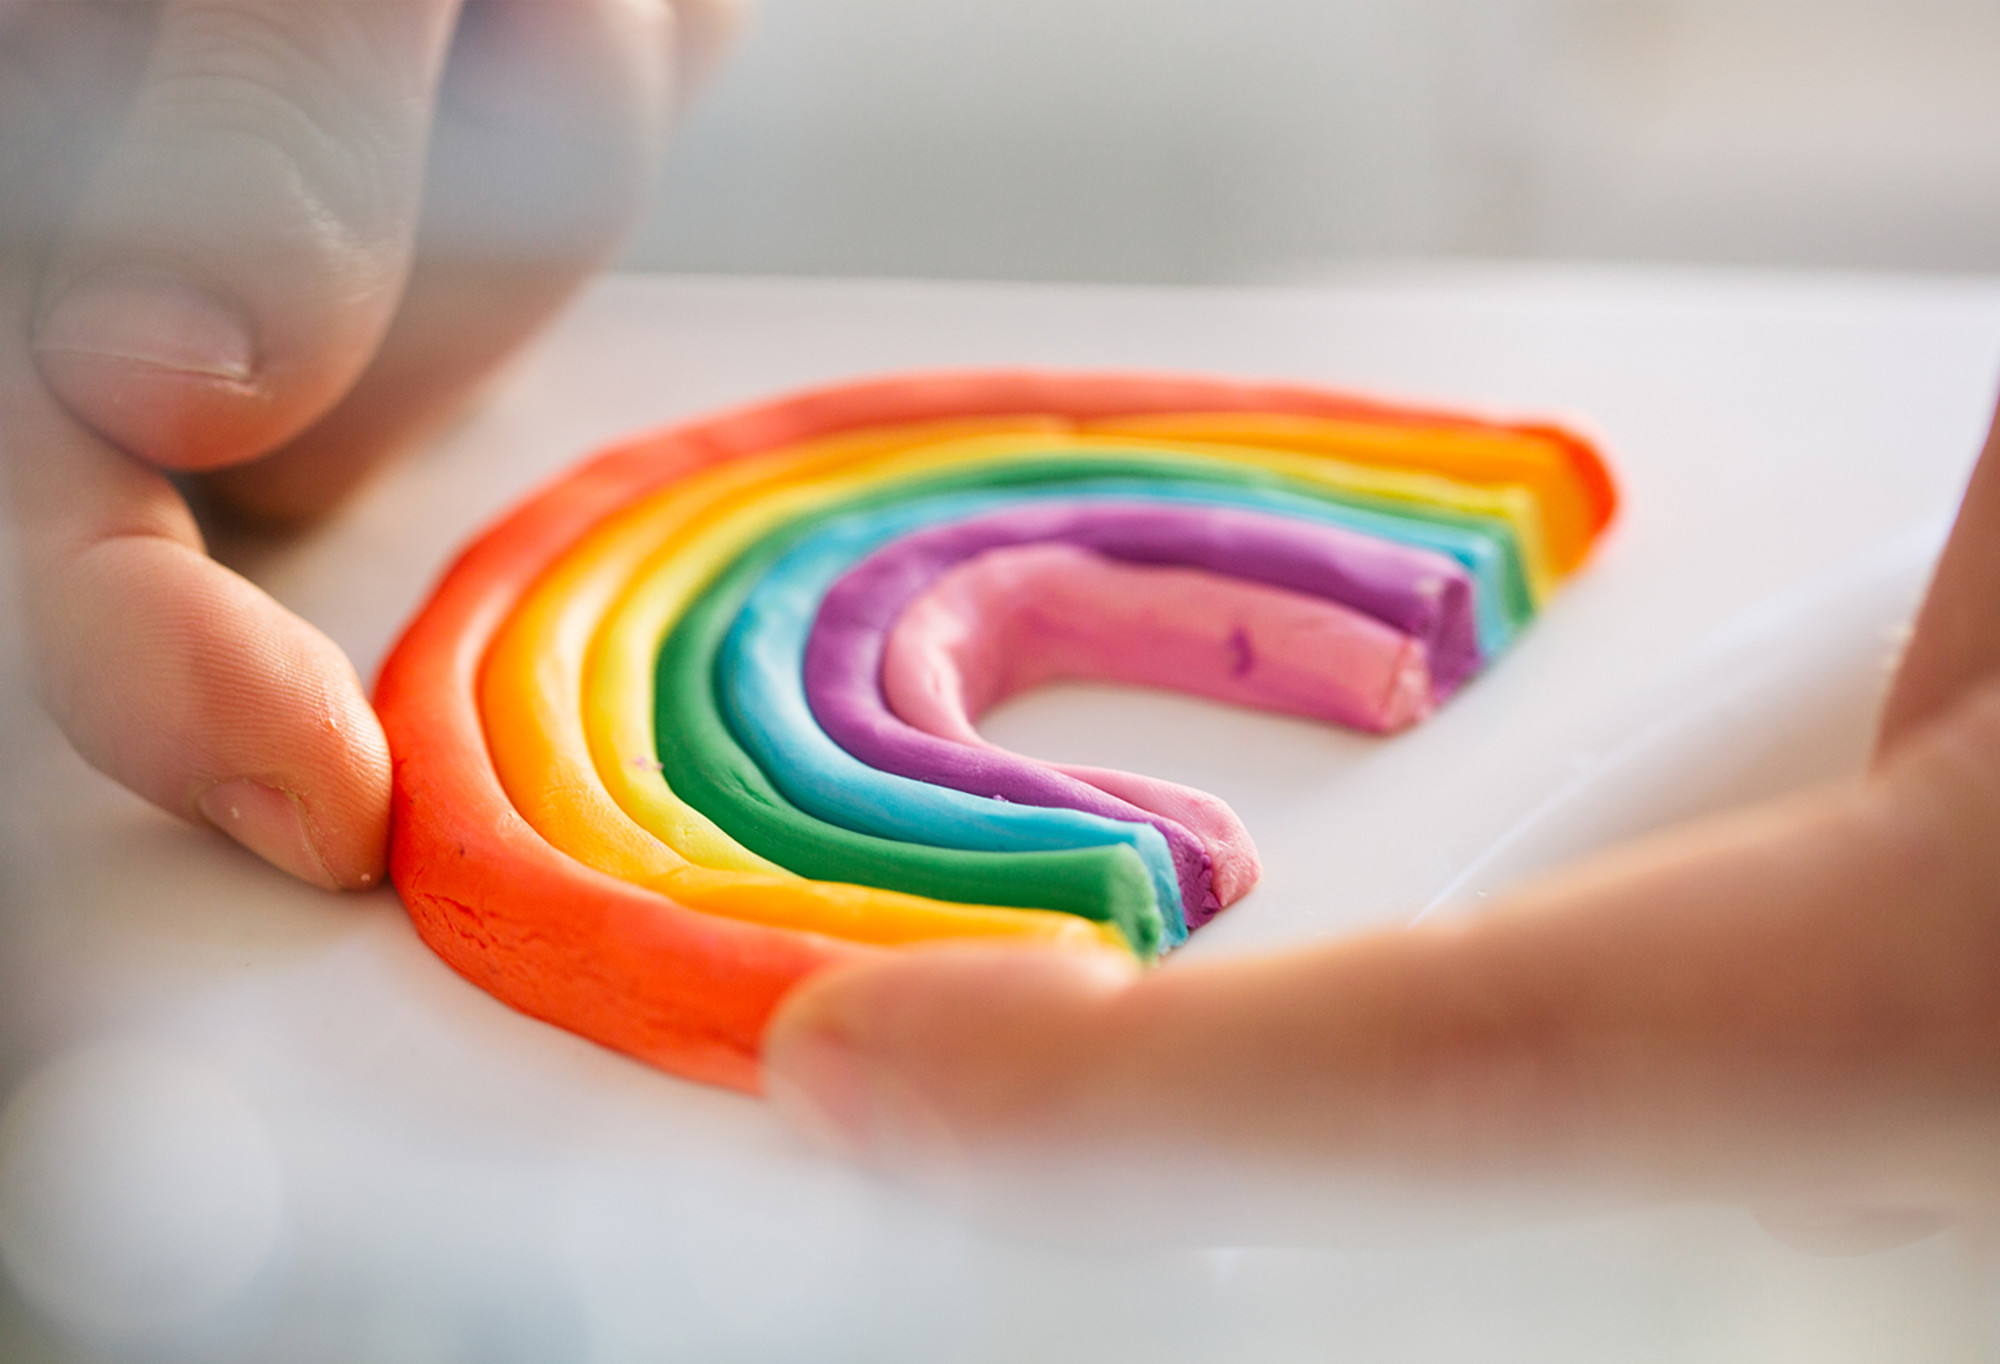 A rainbow, complete with every colour, has been created out of Rainbow Fun.